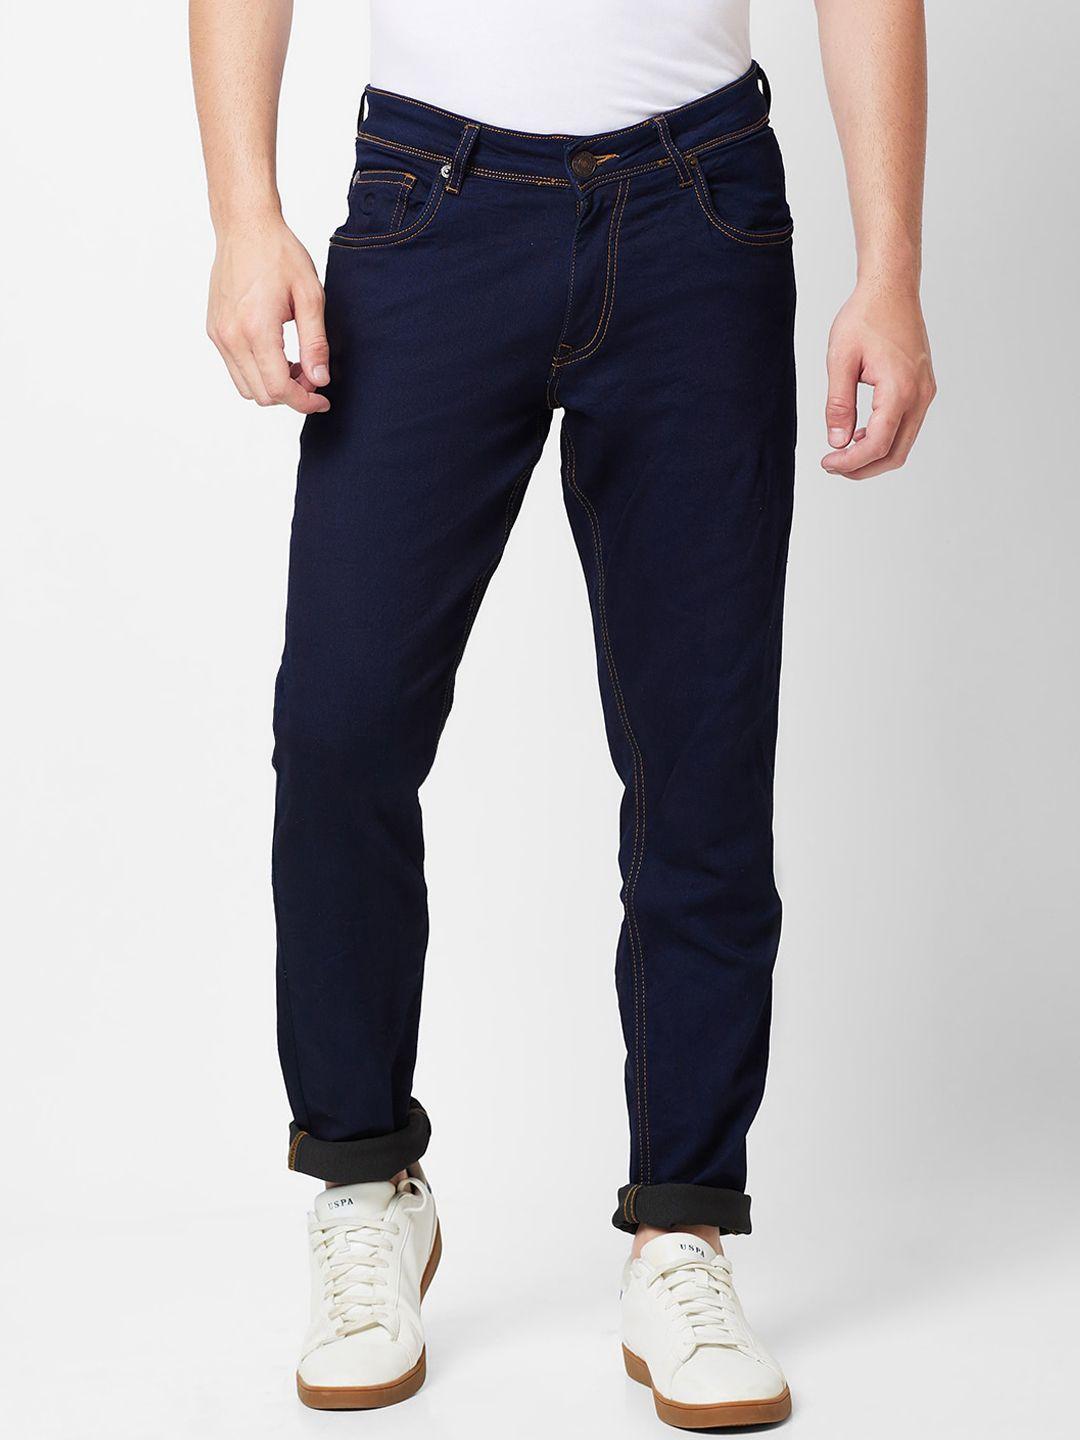 giordano men slim fit clean look stretchable jeans